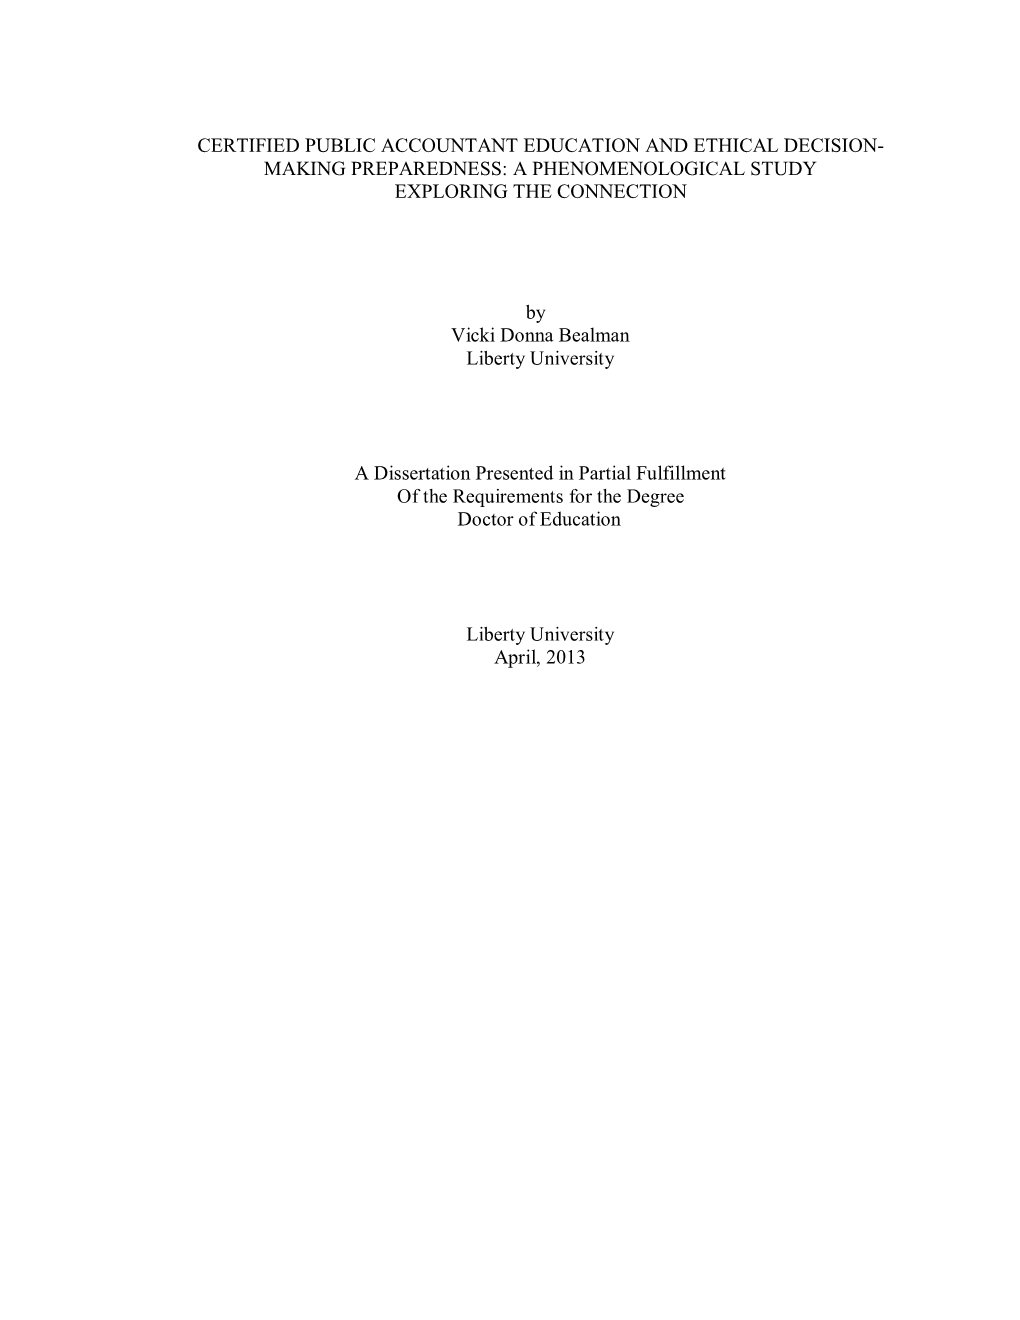 Certified Public Accountant Education and Ethical Decision- Making Preparedness: a Phenomenological Study Exploring the Connection